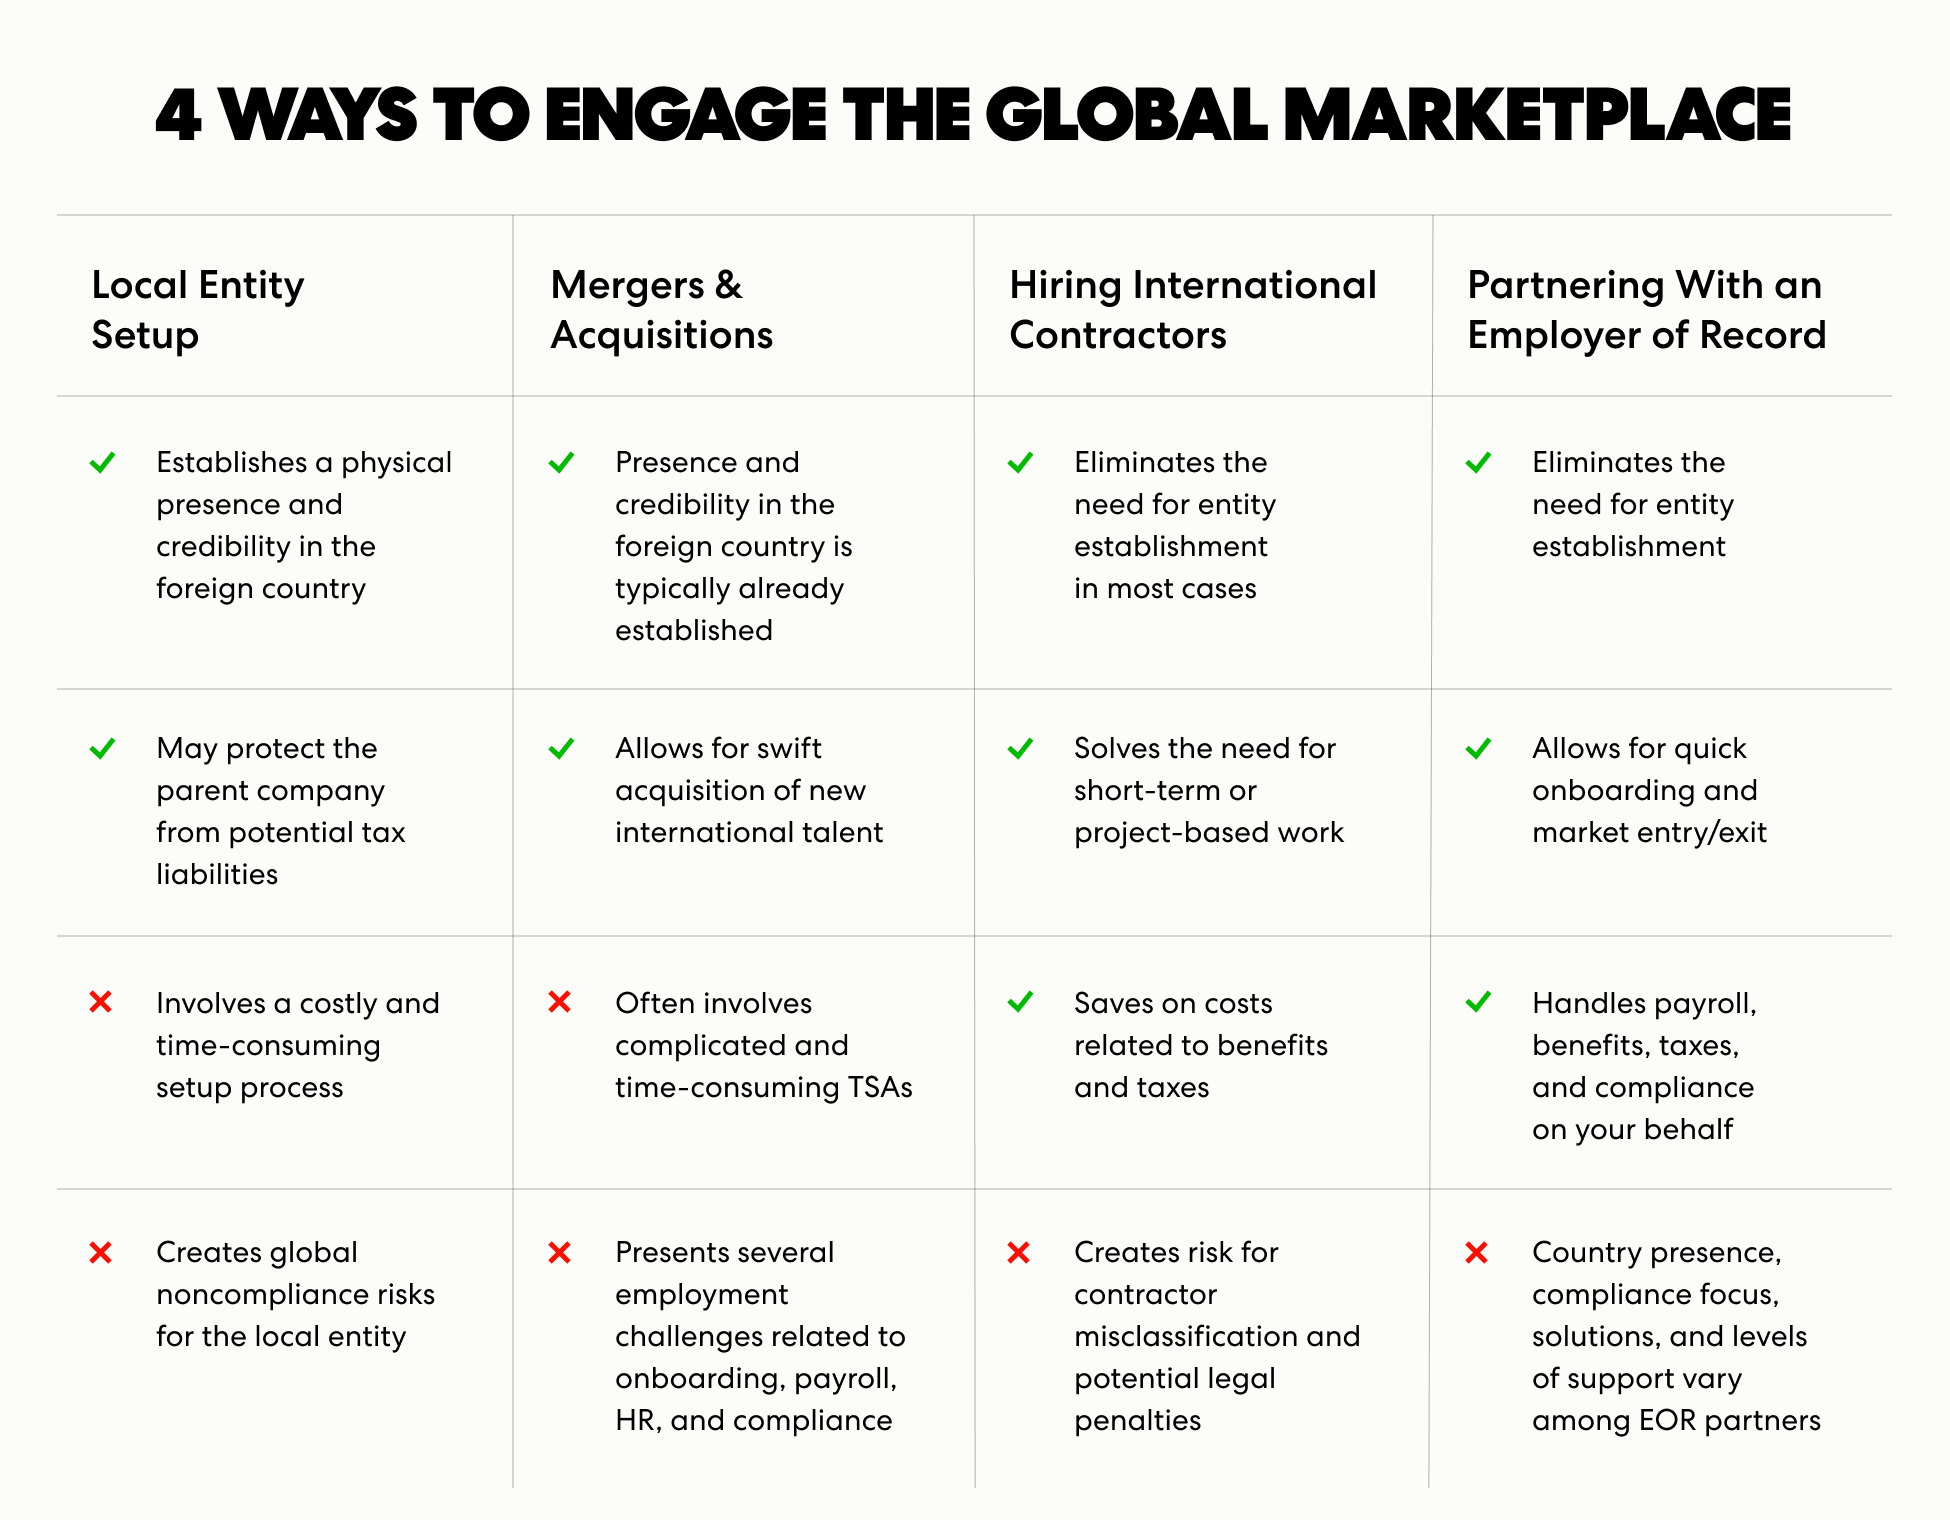 Four ways to engage the global marketplace: local entity setup, M&As, hiring contractors, and partnering with an EOR